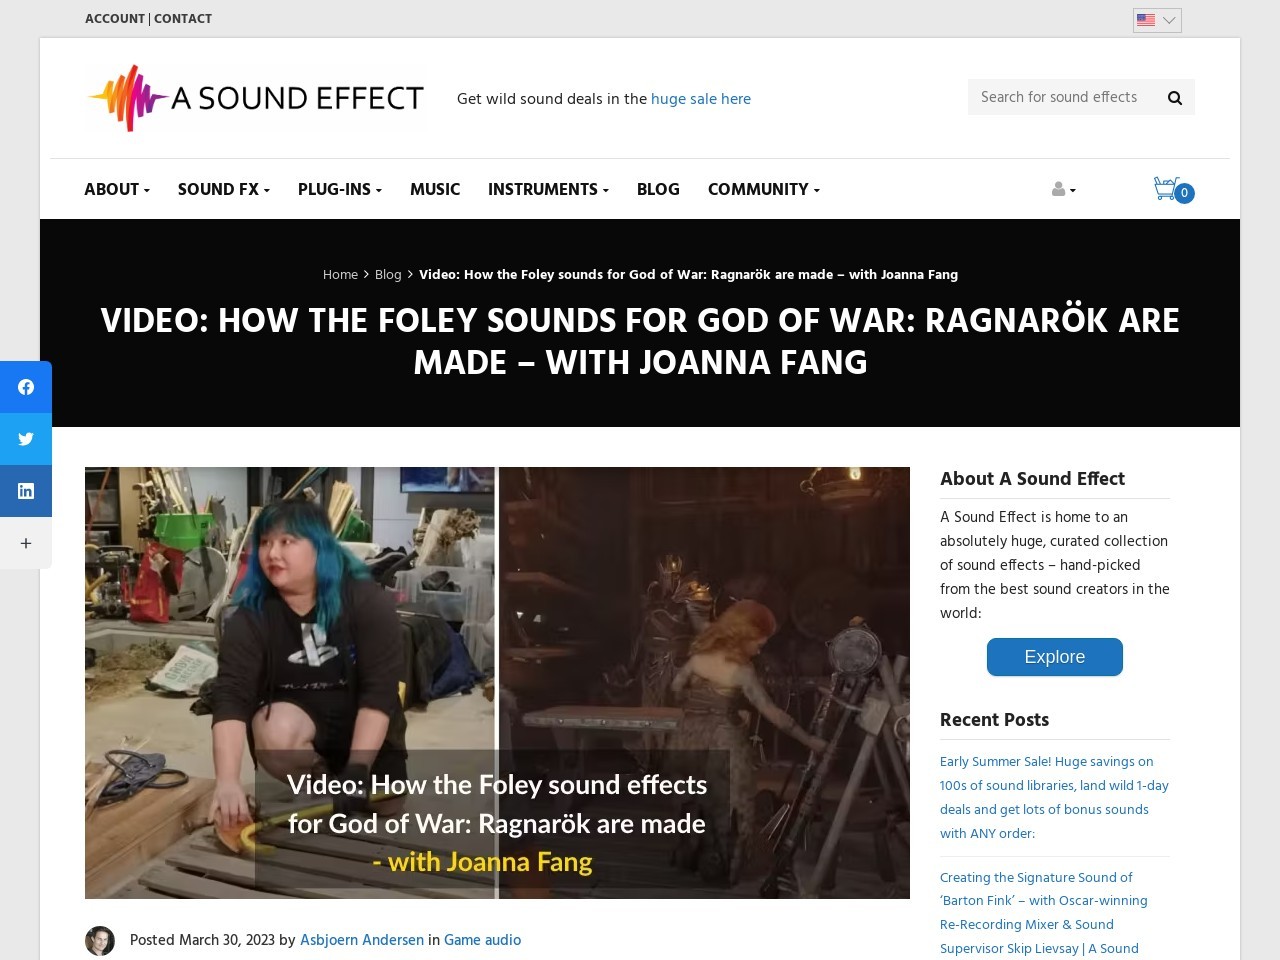 Video: How The Foley Sounds For God Of War: Ragnarök Are Made - With Joanna Fang | A Sound Effect